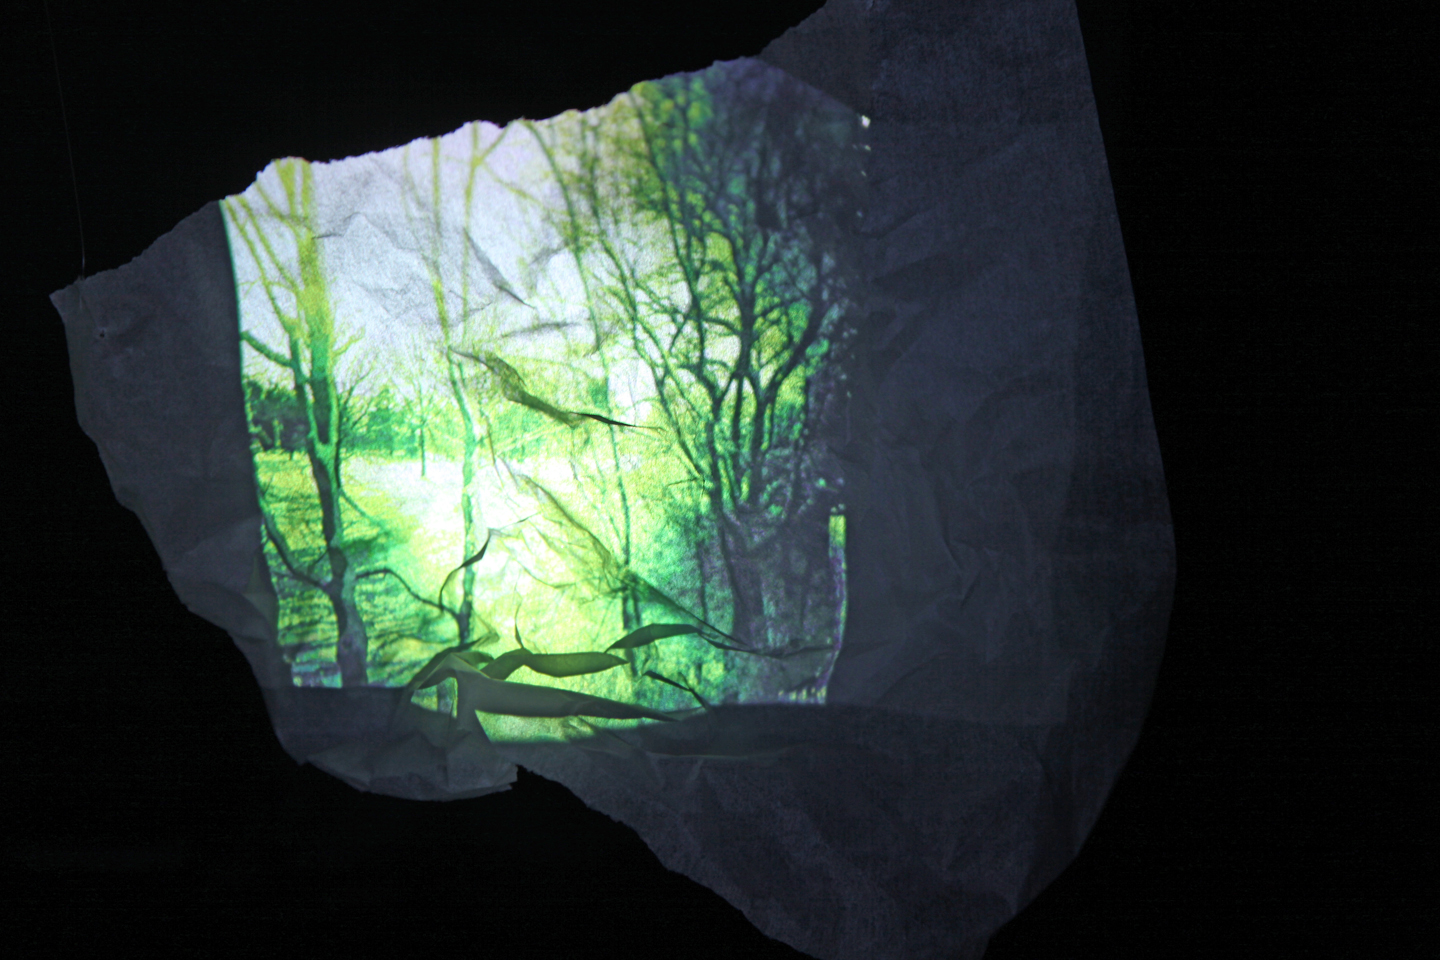 Keep Box, mixed media with projection, 2014. Projection detail.